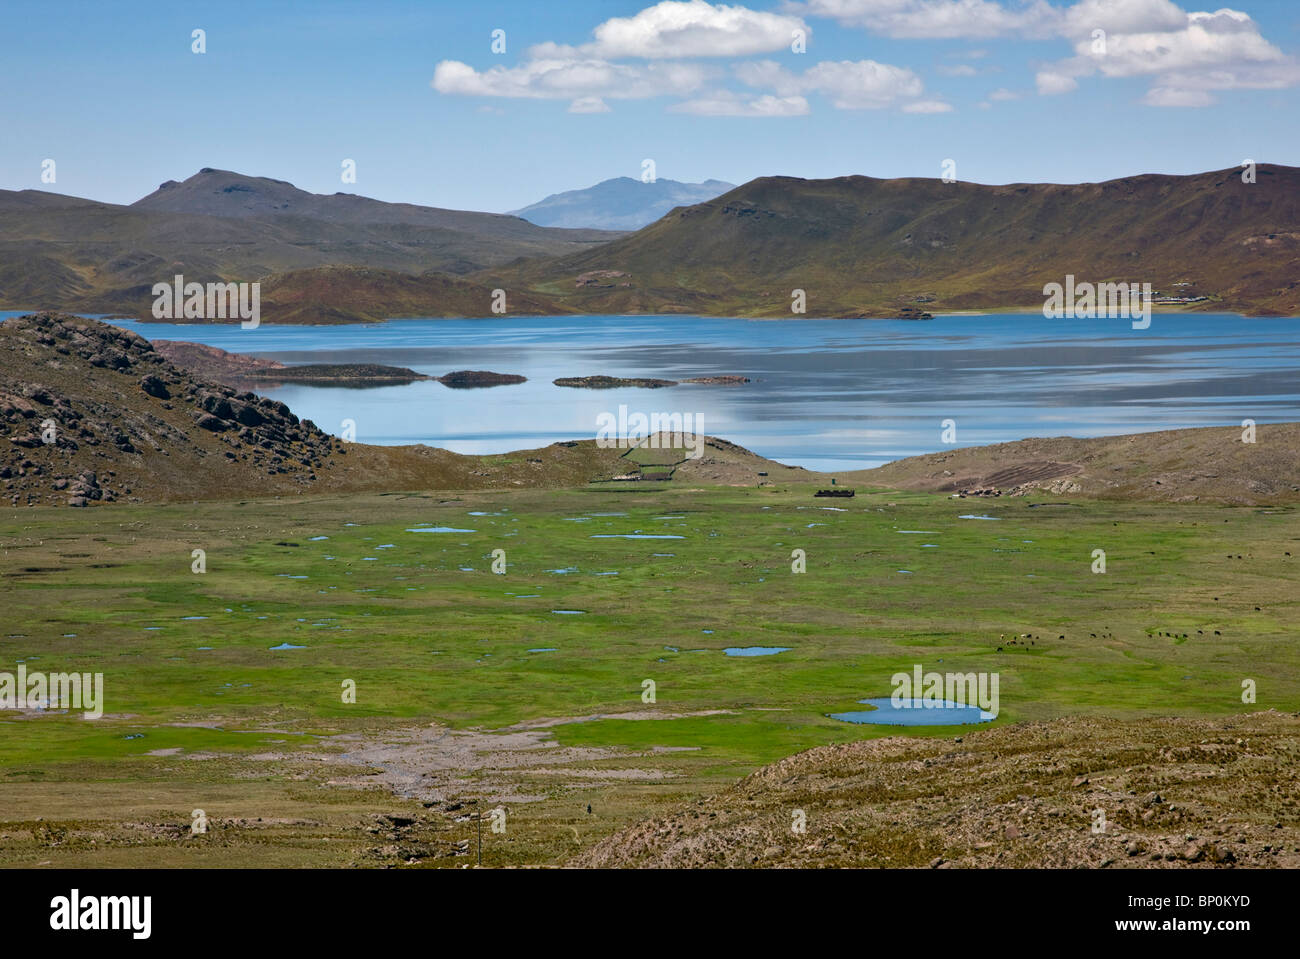 Peru, Lake Lagunillas is situated in the altiplano of the Andes at an altitude of over 4,000m between Arequipa and Colca Canyon. Stock Photo